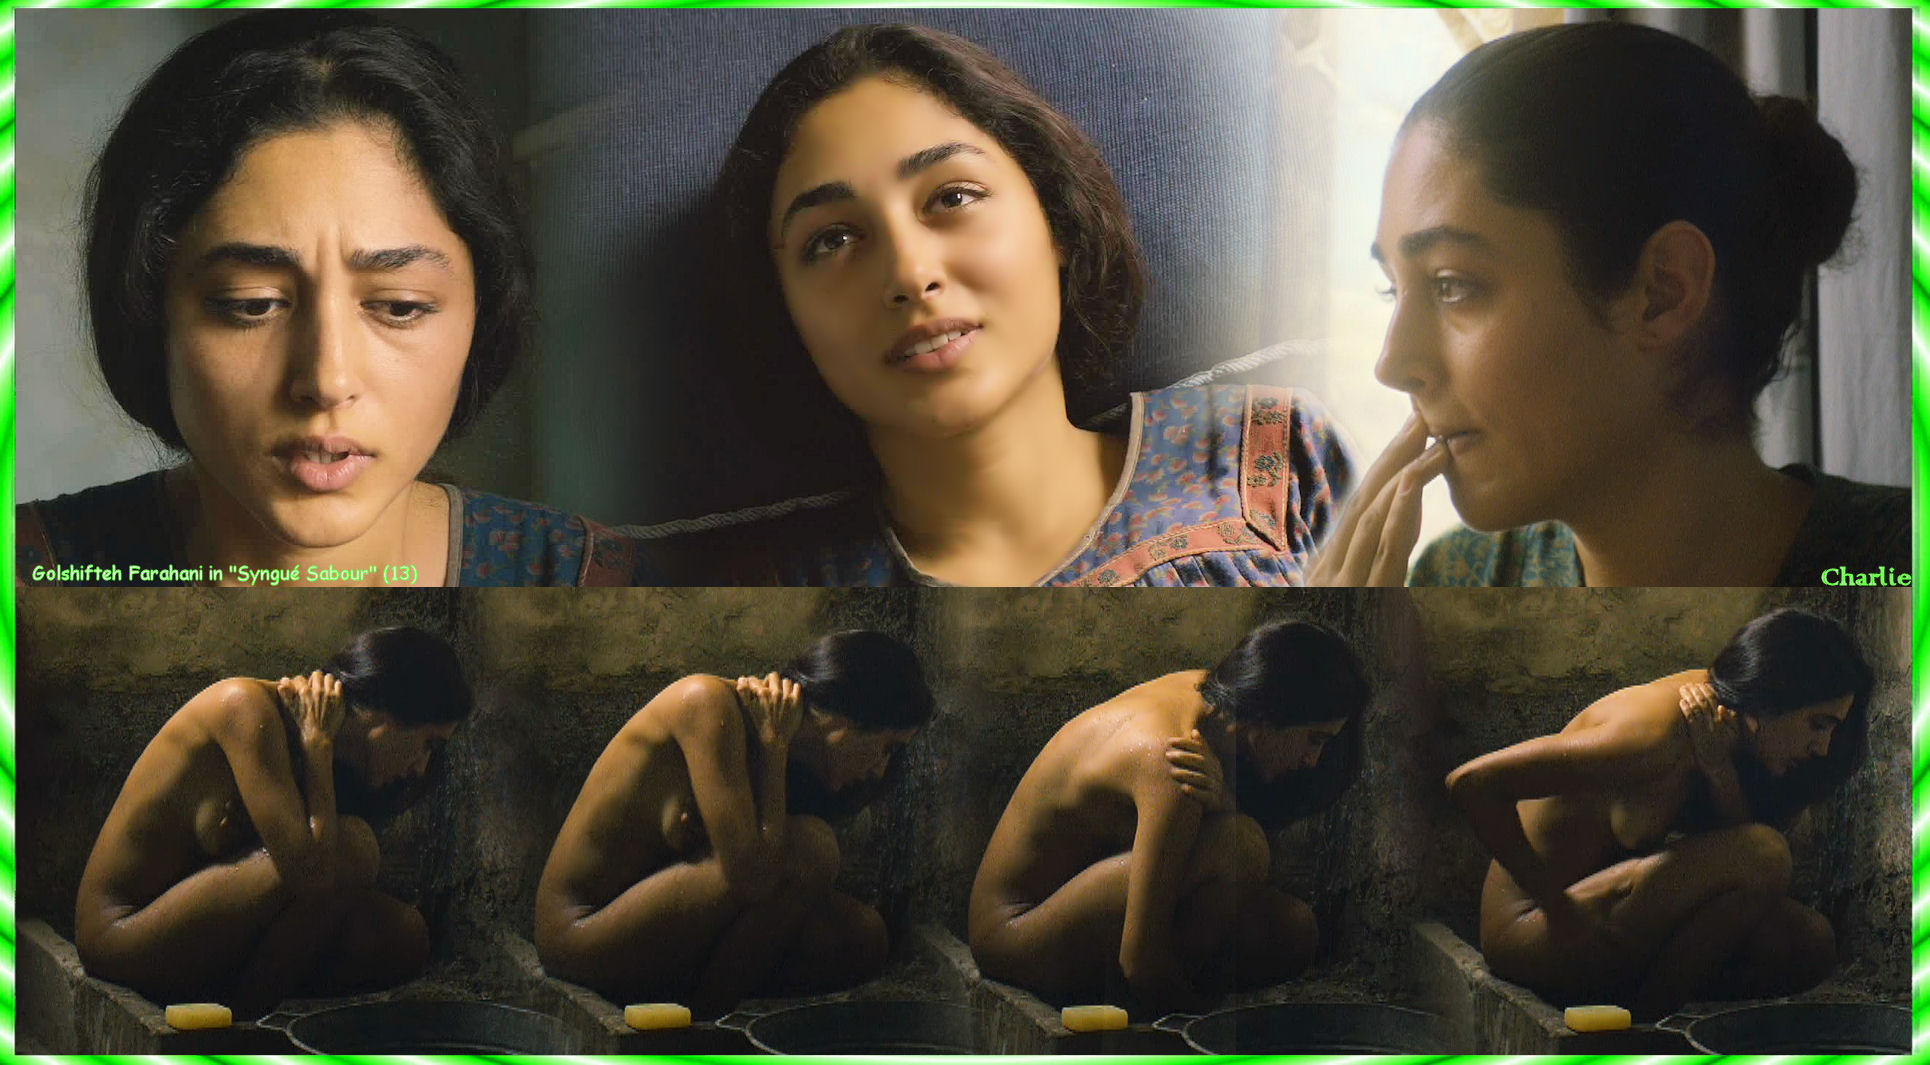 amy schreck recommends golshifteh farahani porn pic